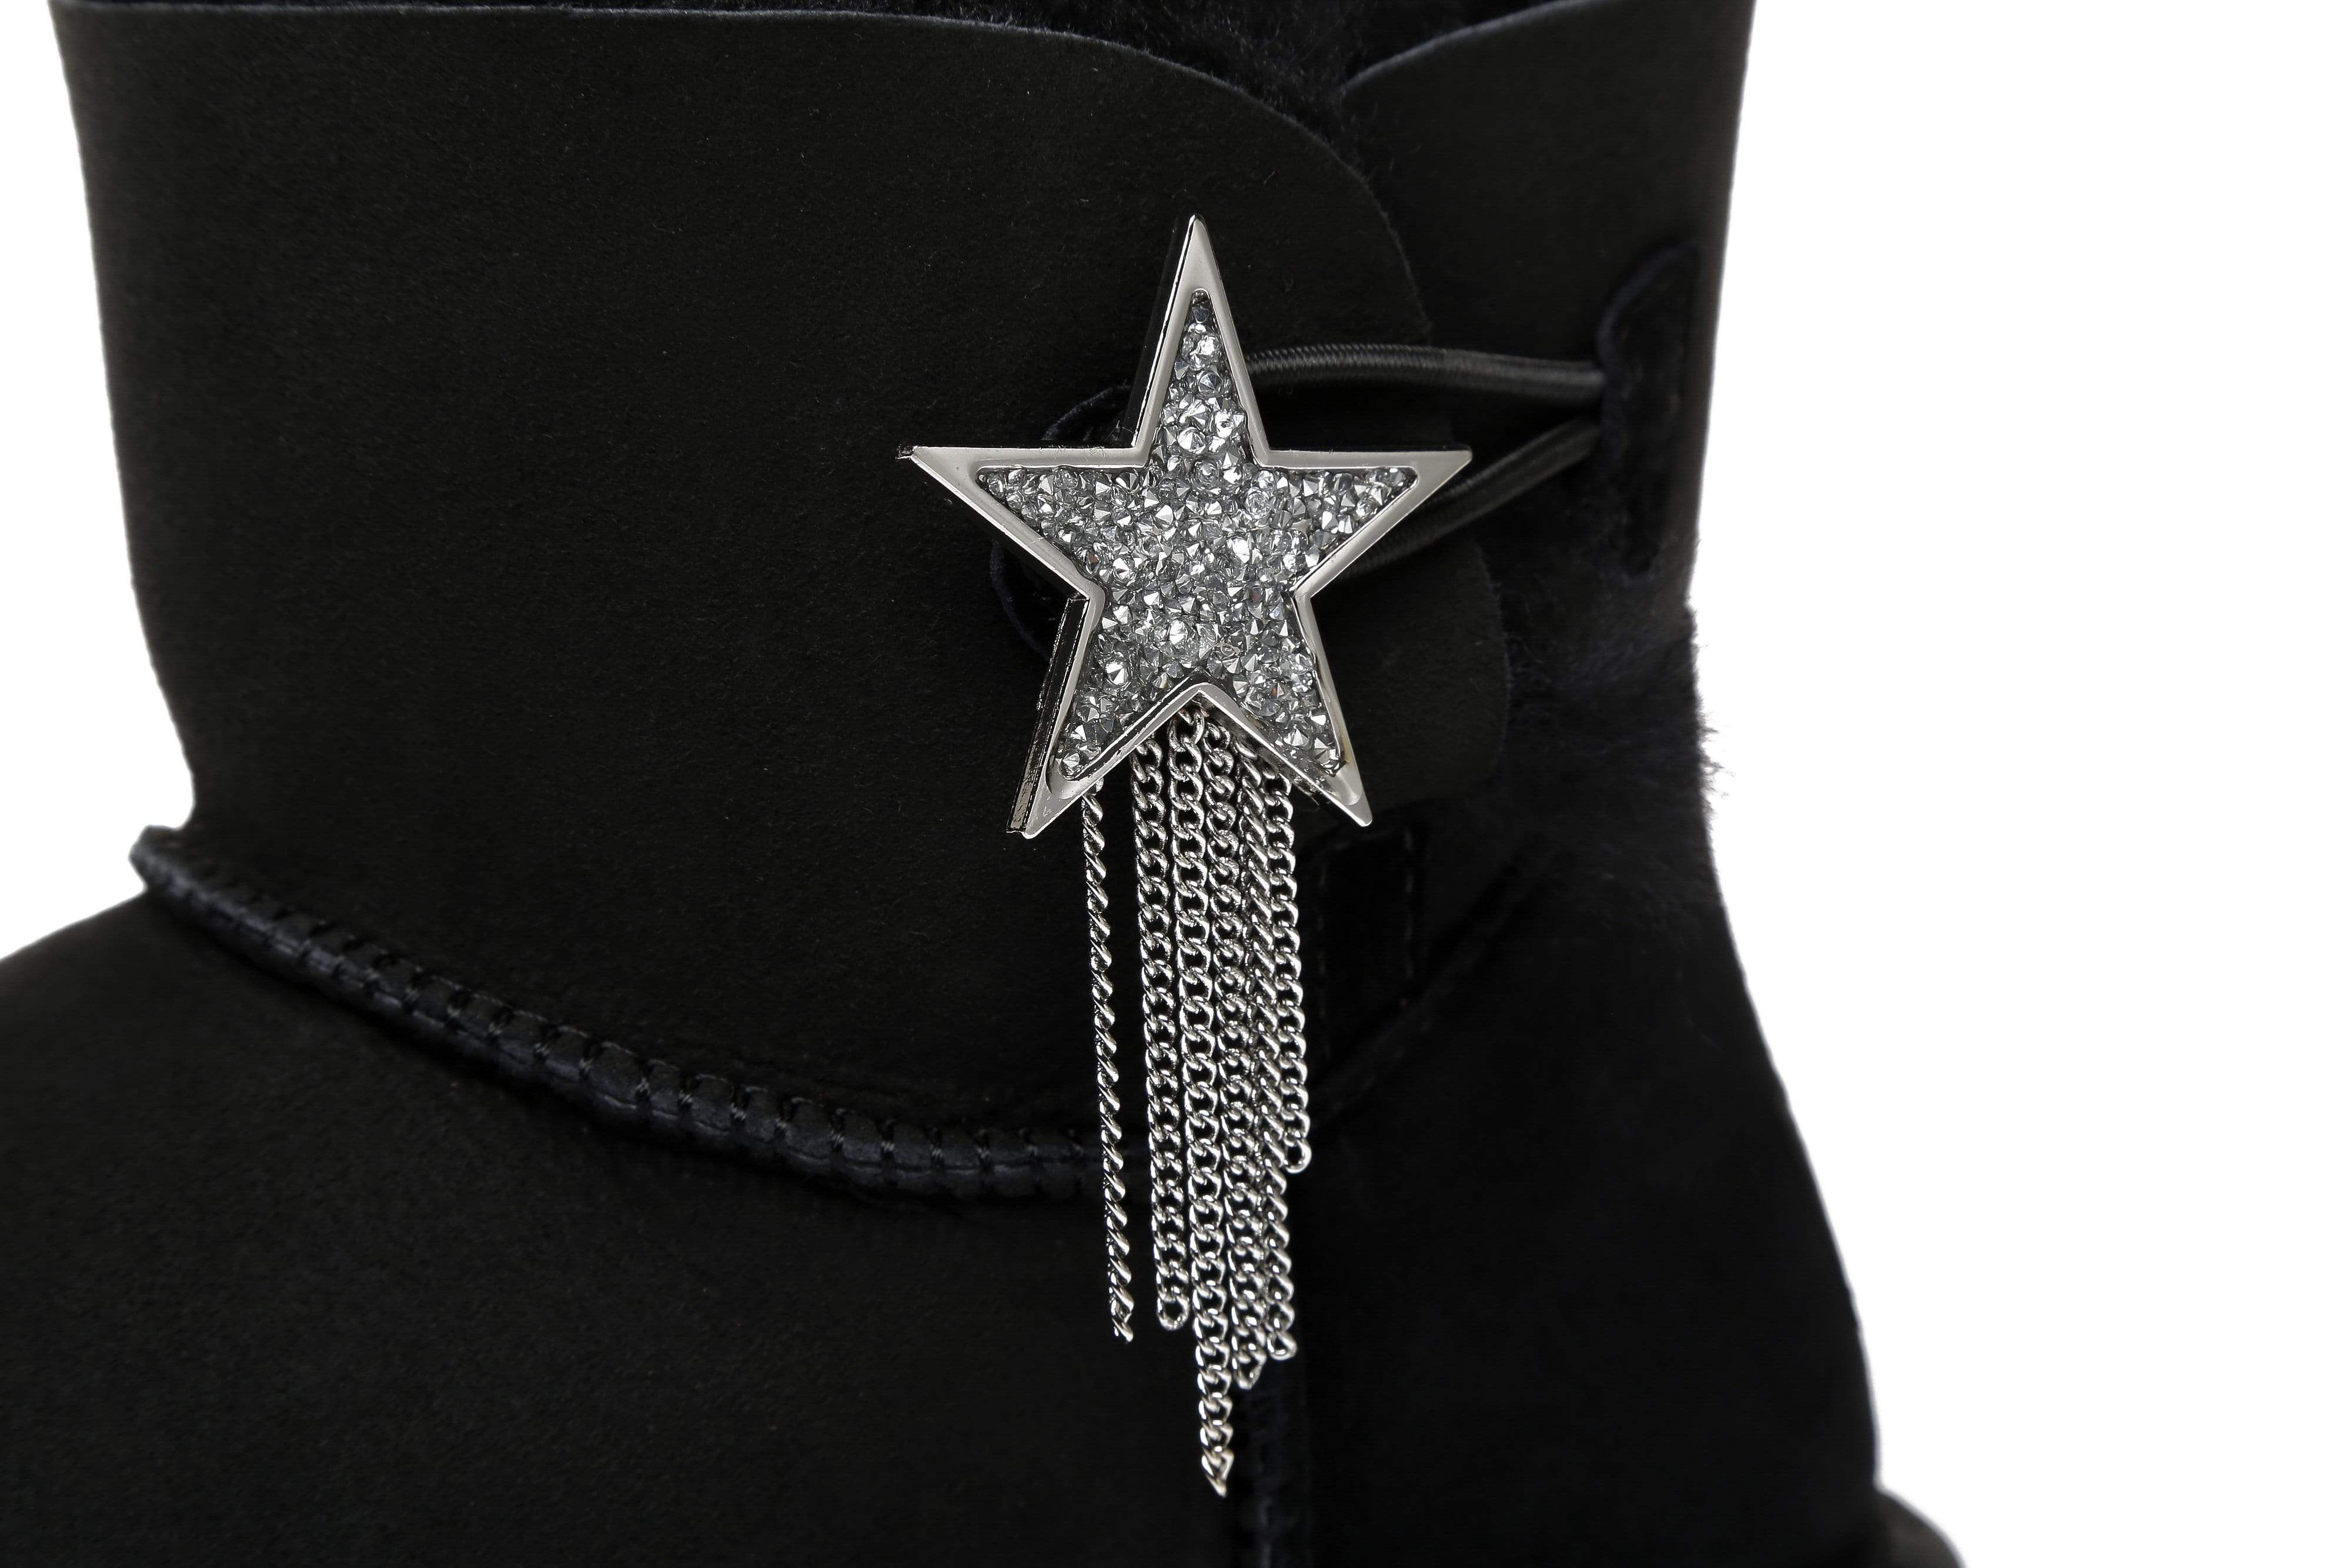 UGG Boots - AS UGG Mini Boots Side Star Button Meteor